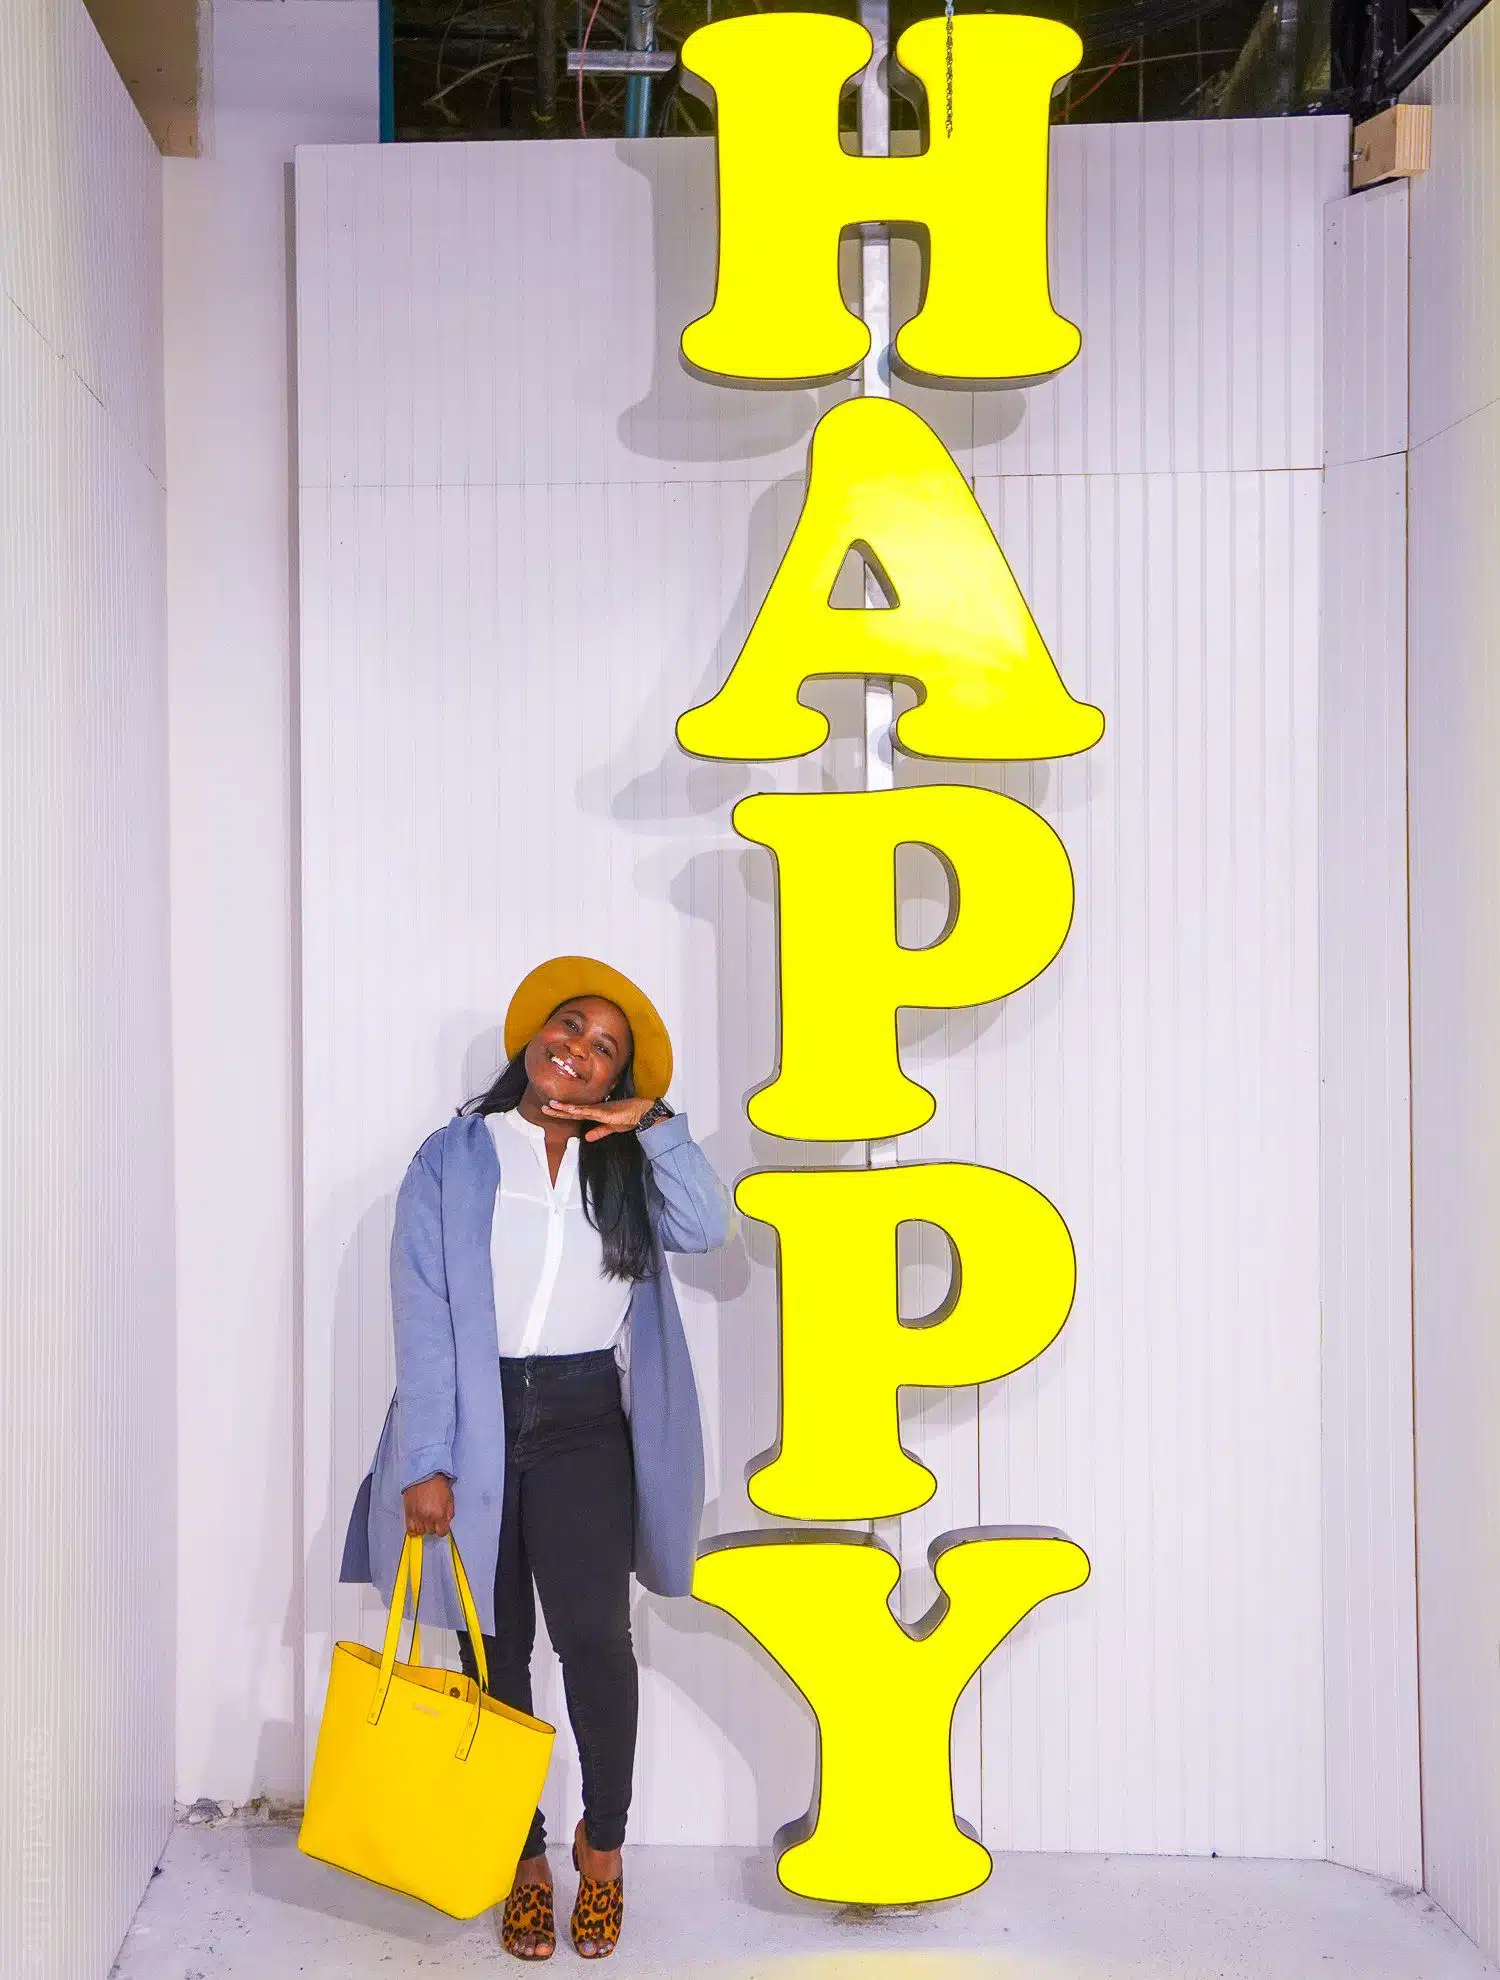 HAPPY sign and influence synonym at Boston Happy Place photo pop-up installation